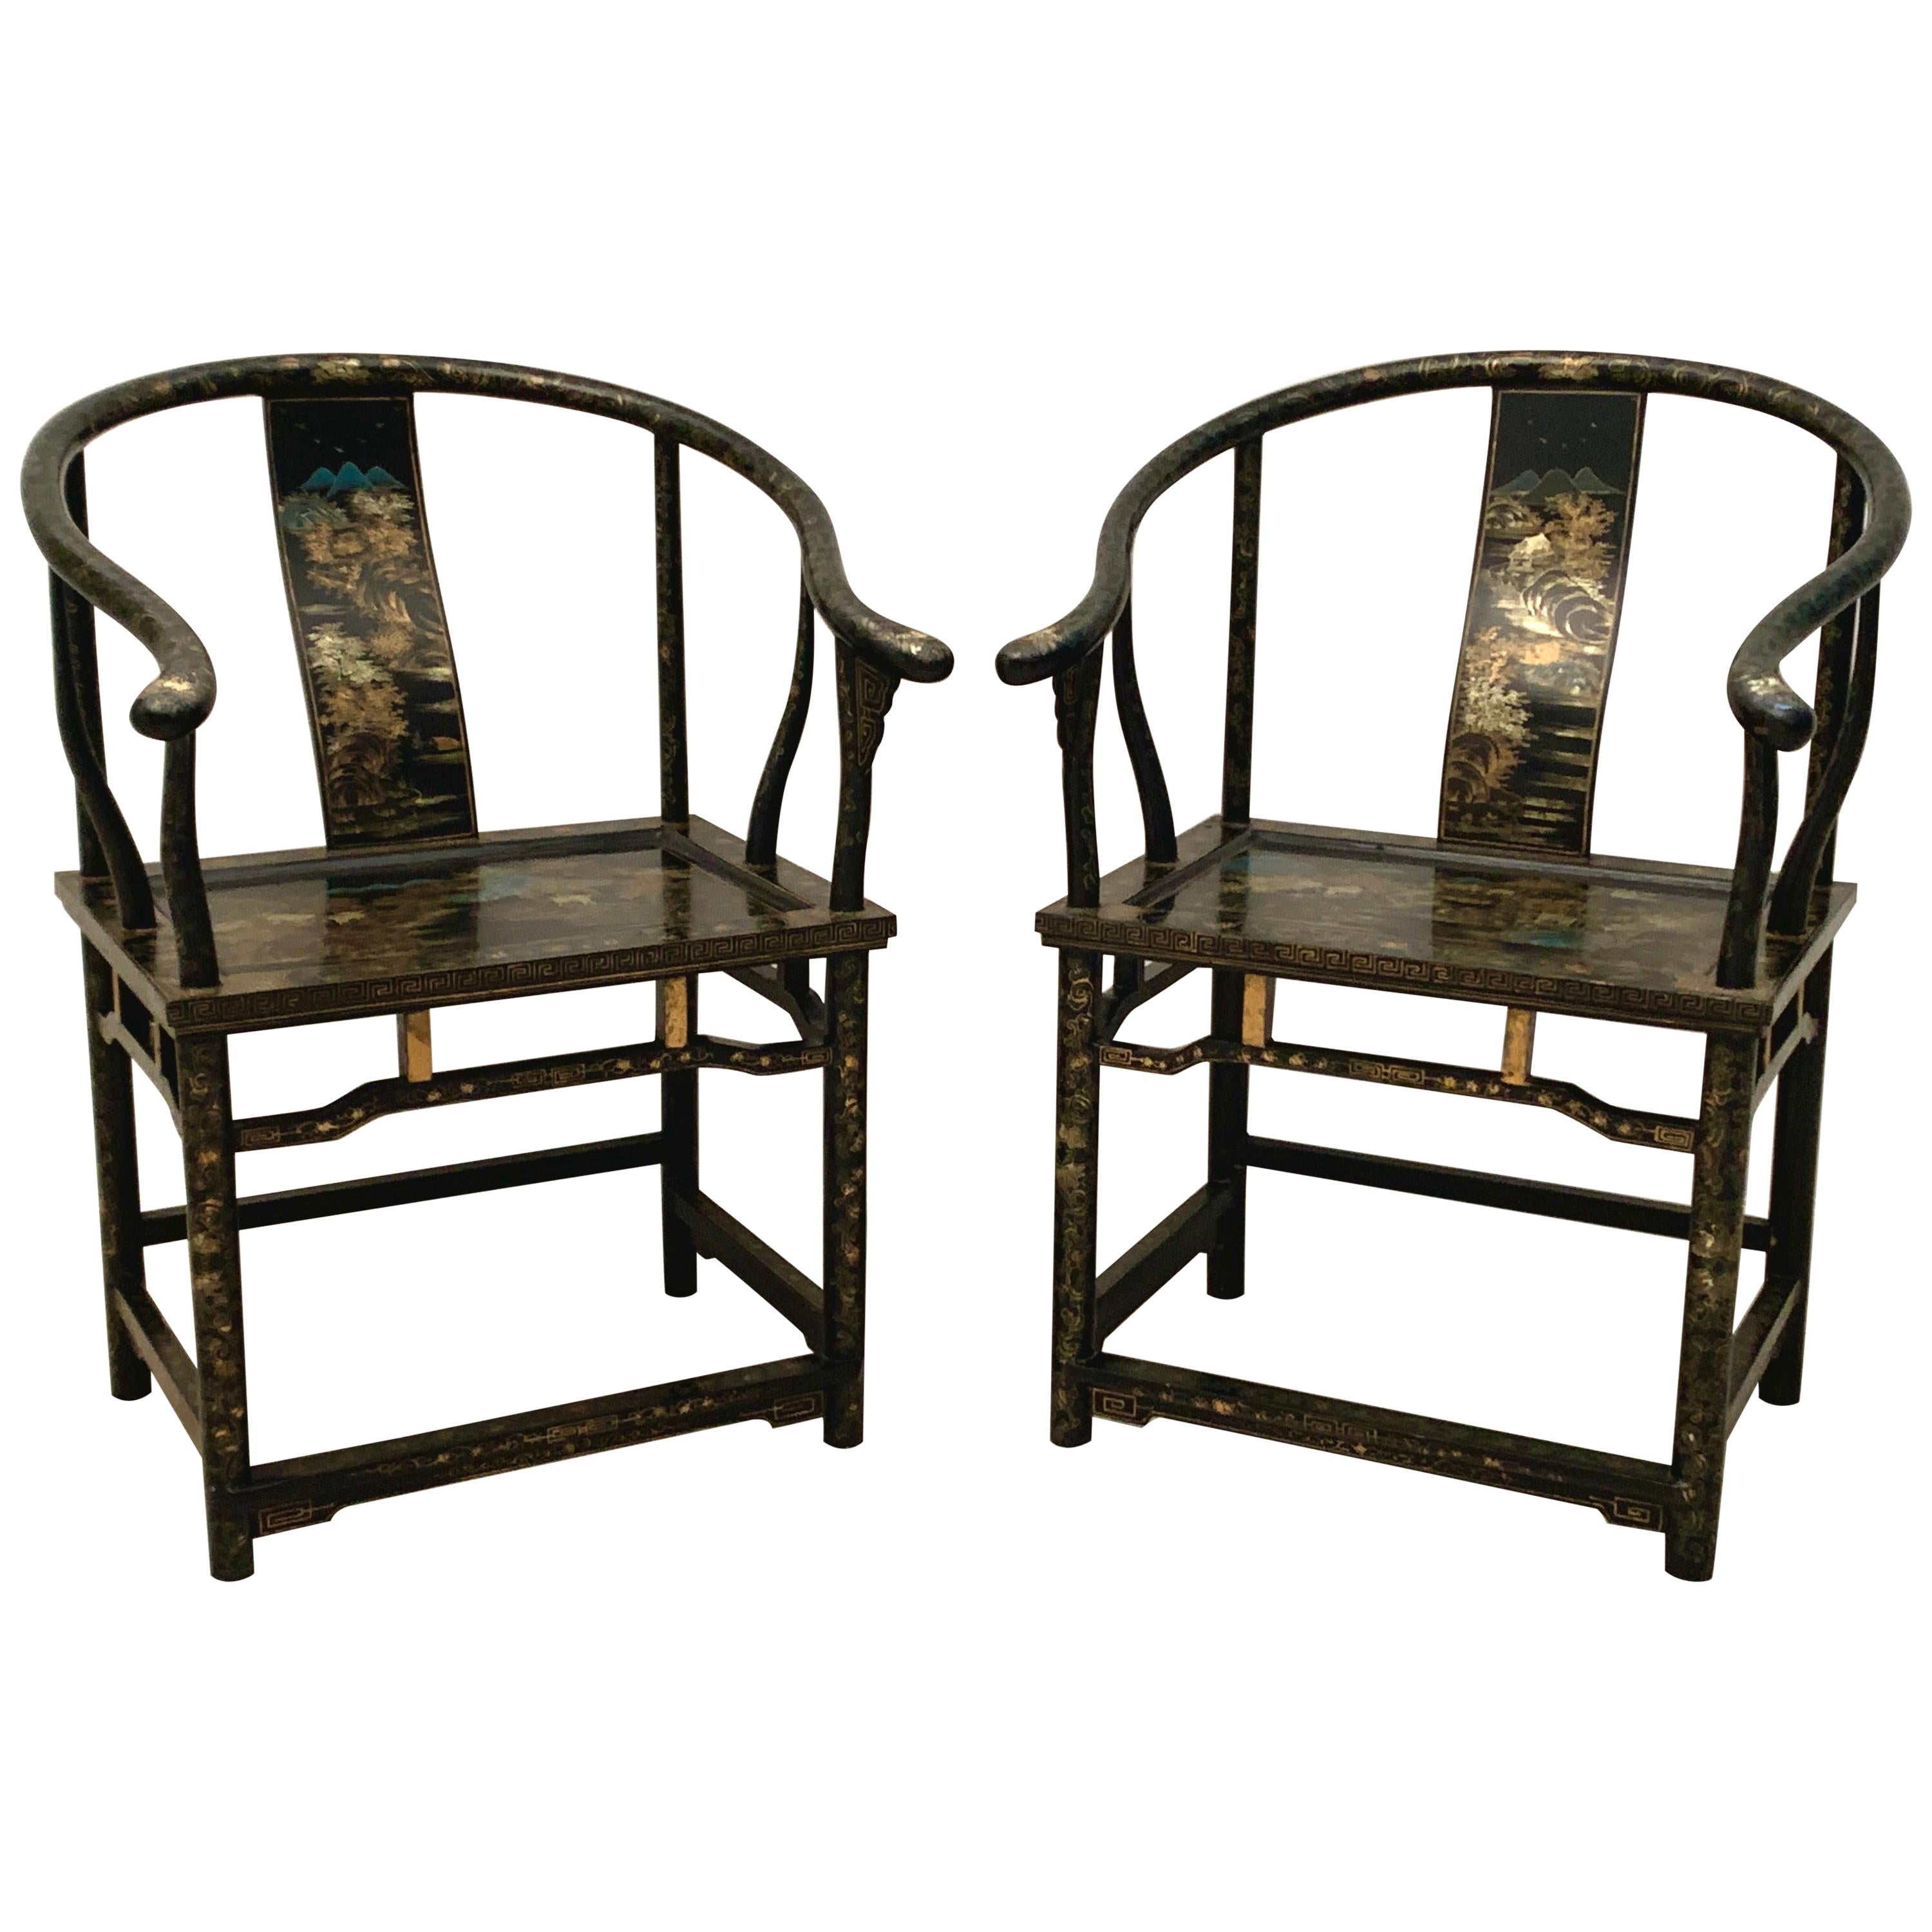 Pair Chinese Export Black Lacquer and Gilt Painted Horseshoe Back Chairs